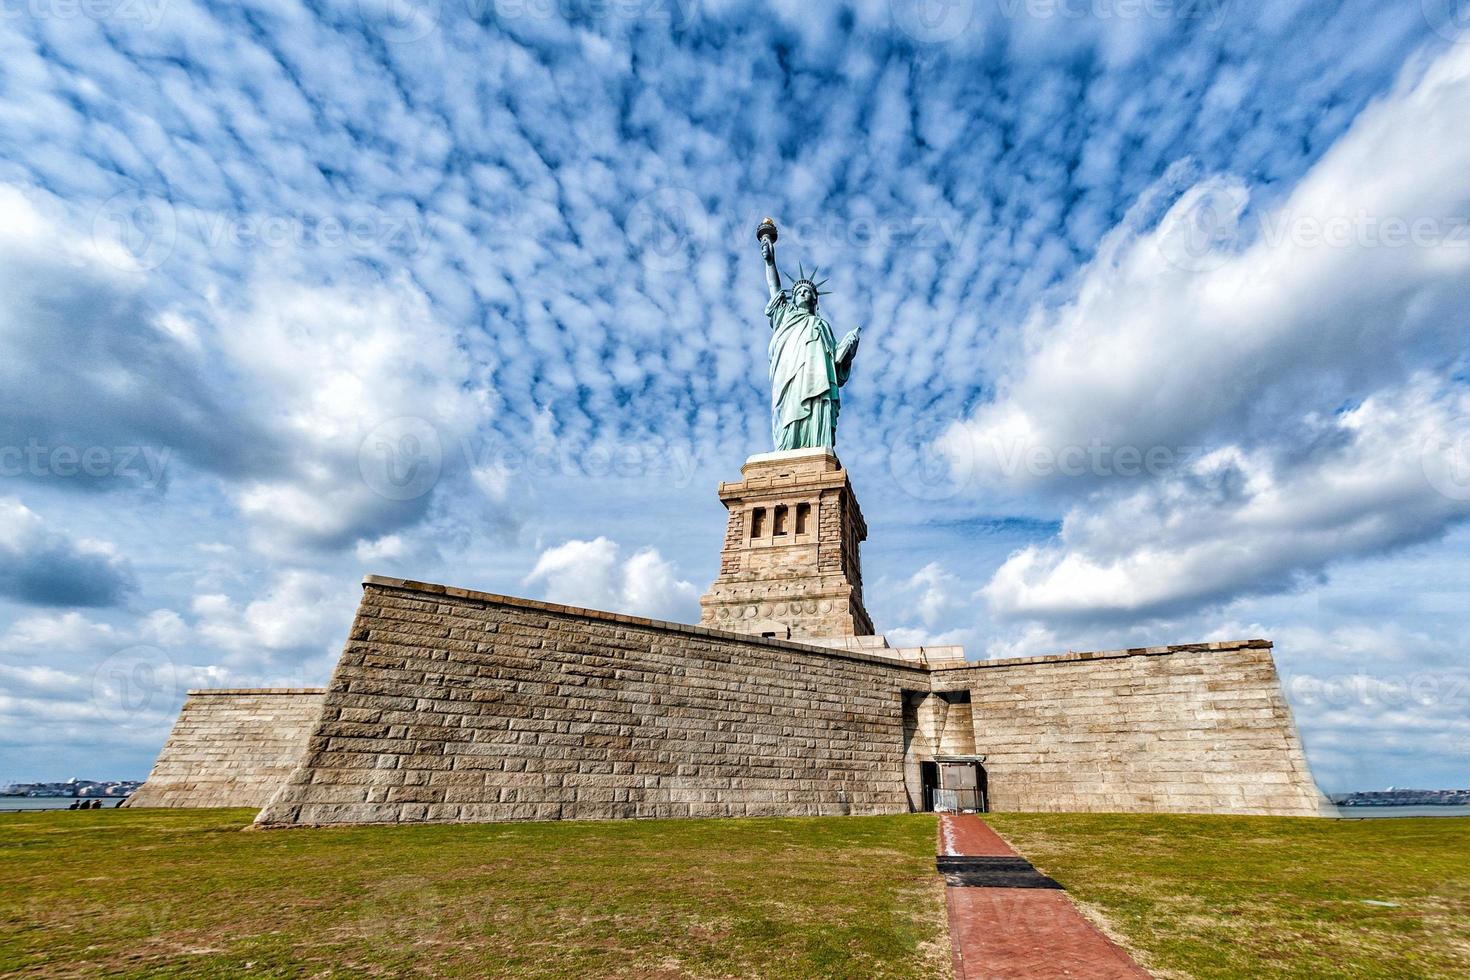 Statue of liberty in New York photo